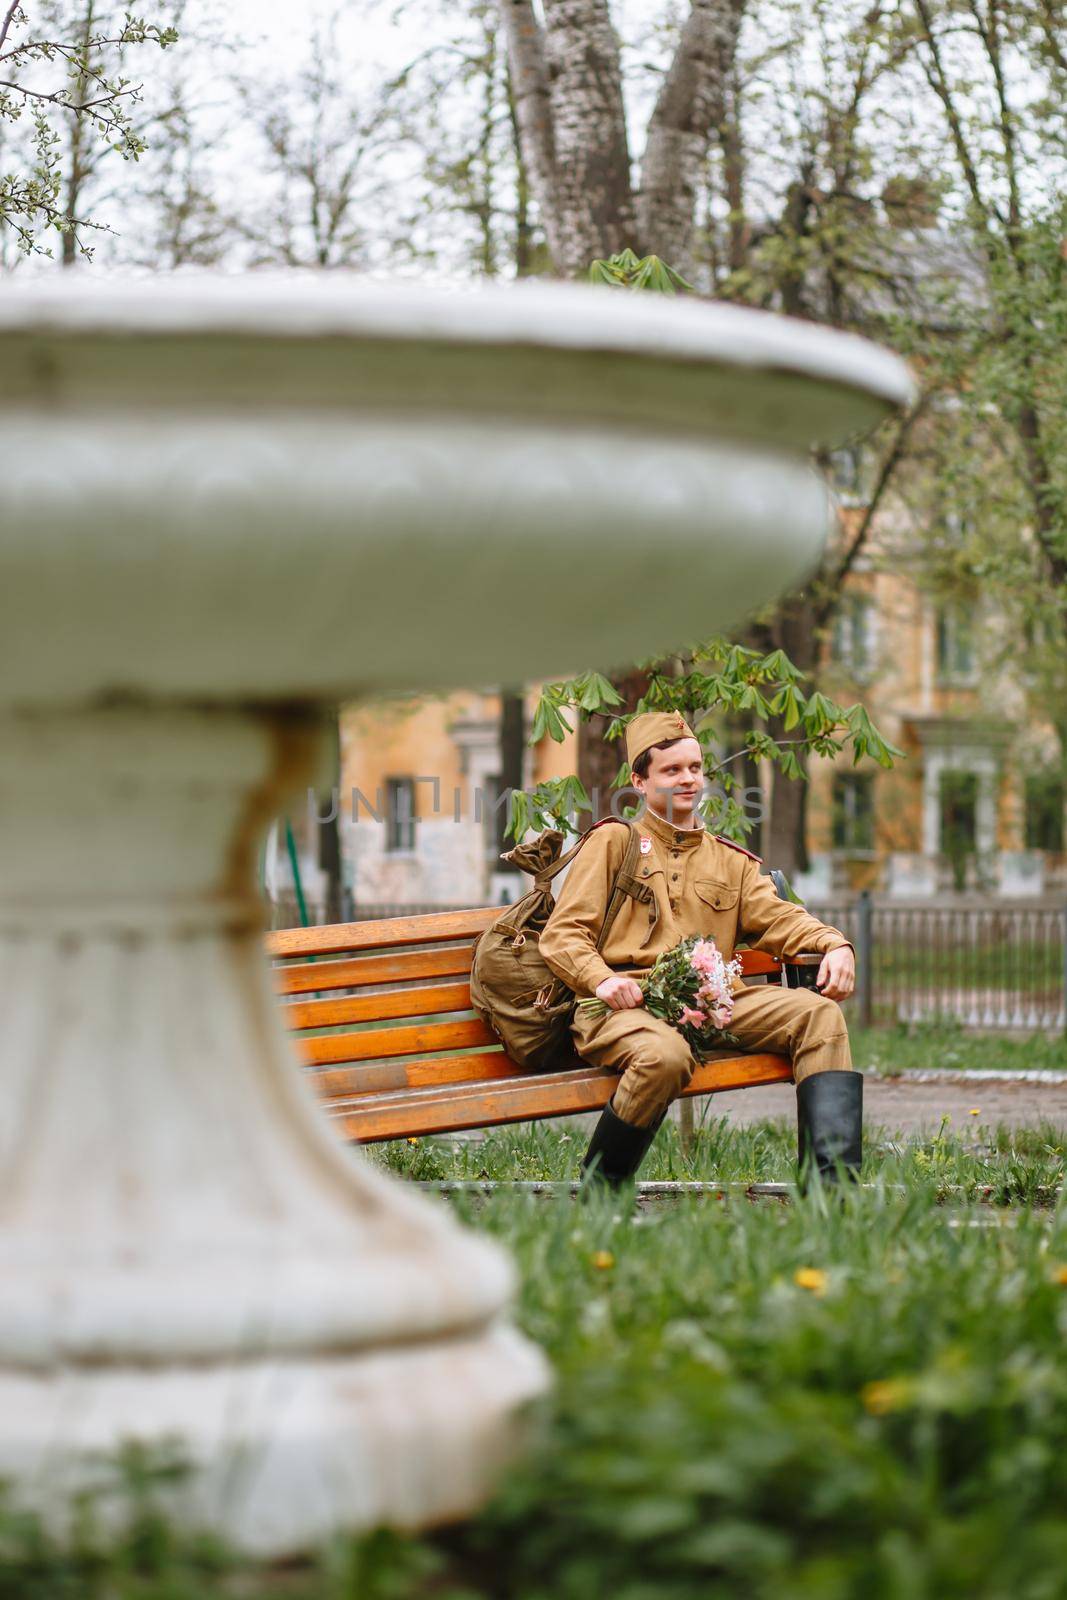 A soldier in a Soviet military uniform sits on a bench. In his hands a bouquet by deandy